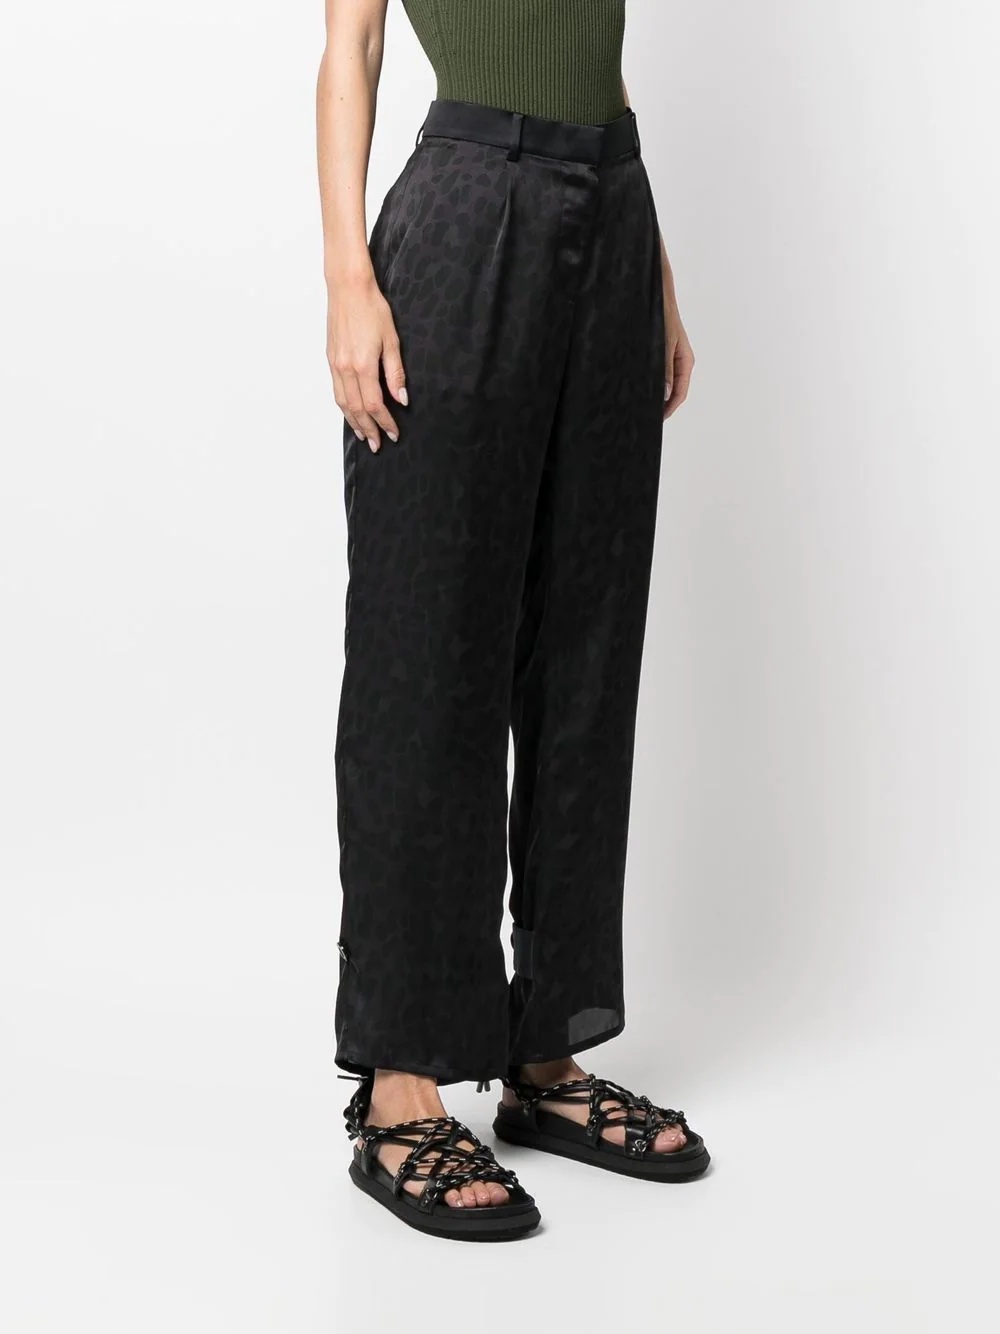 high-waisted patterned trousers - 3